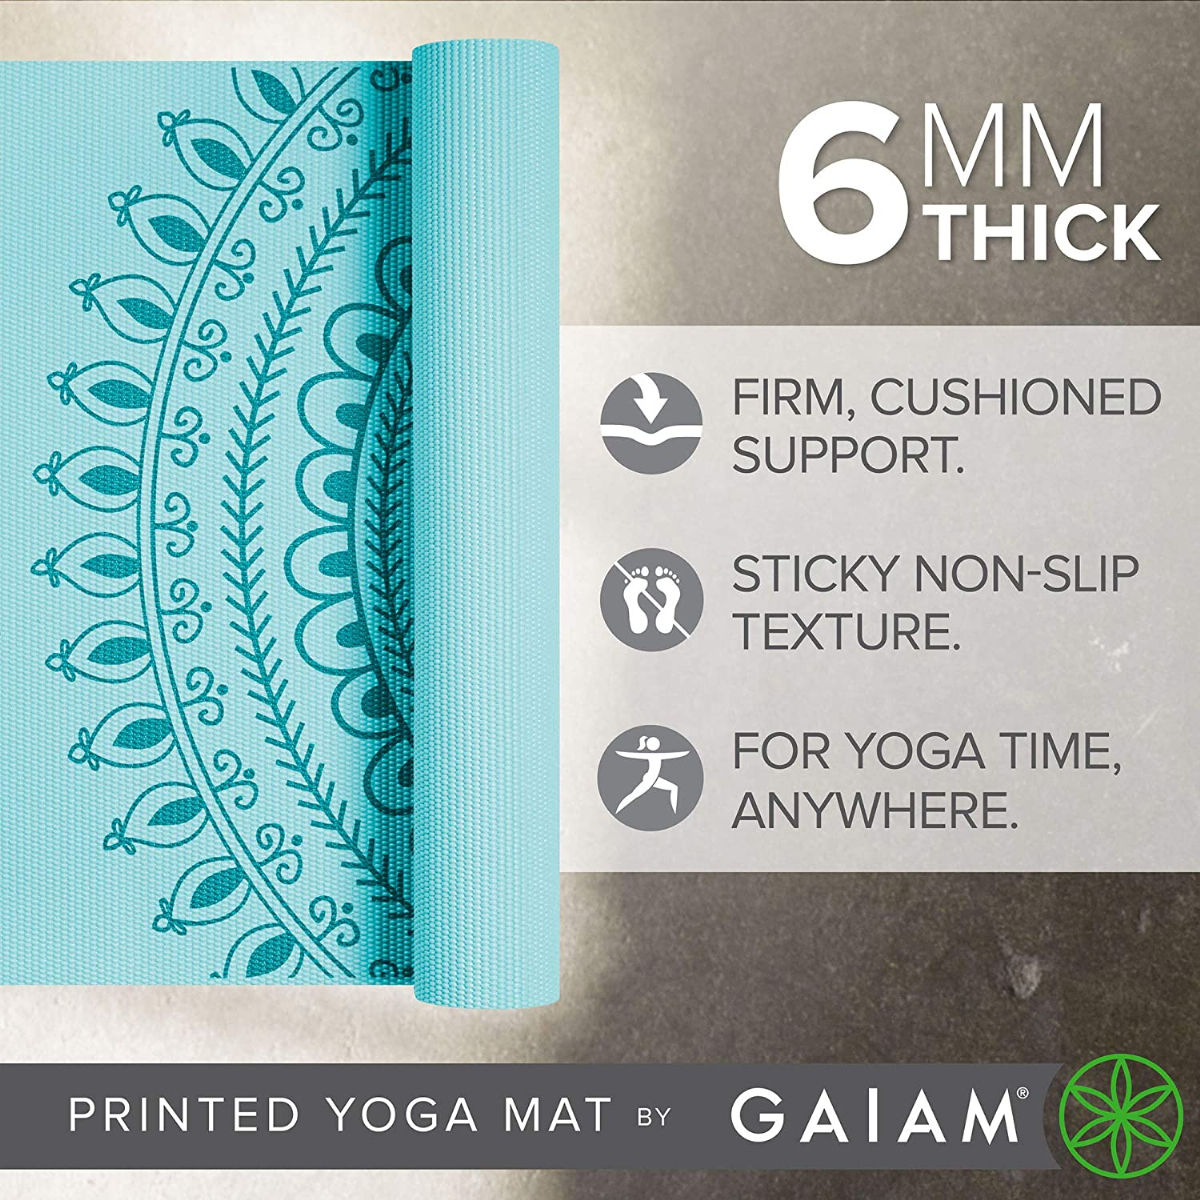 Gaiam Yoga Mat - Premium 6mm Print Extra Thick Non Slip Exercise & Fitness  Mat for All Types of Yoga, Pilates & Floor Workouts (68L x 24W x 6mm Thick)  Marrakesh